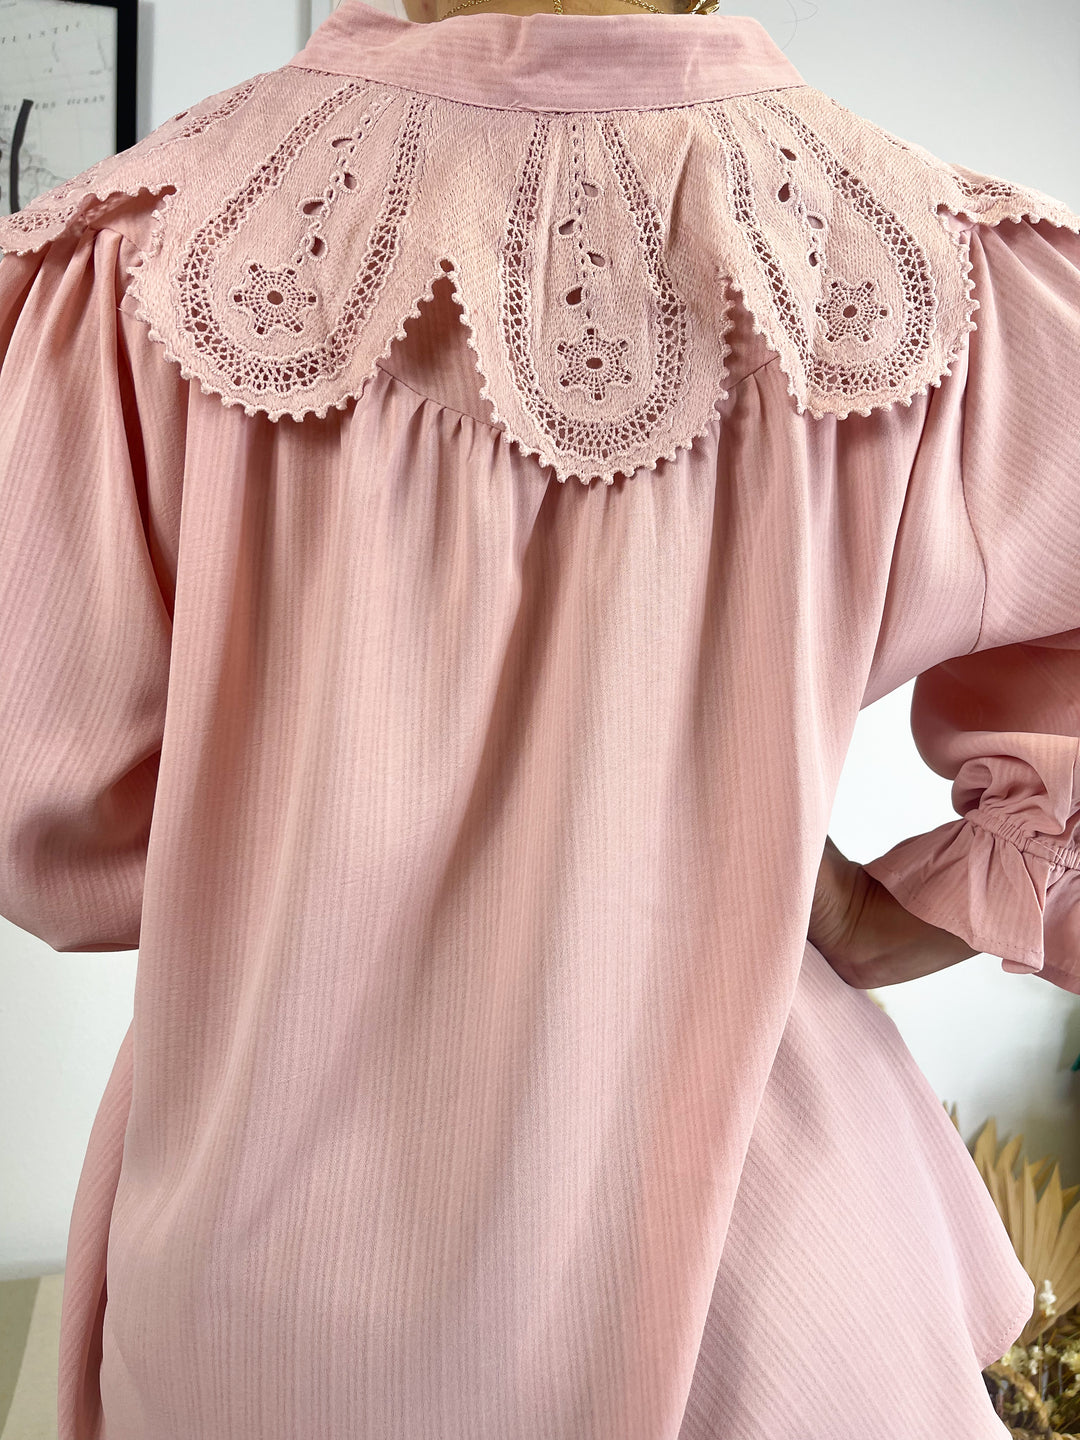 All About The Details Embroidered Blouse